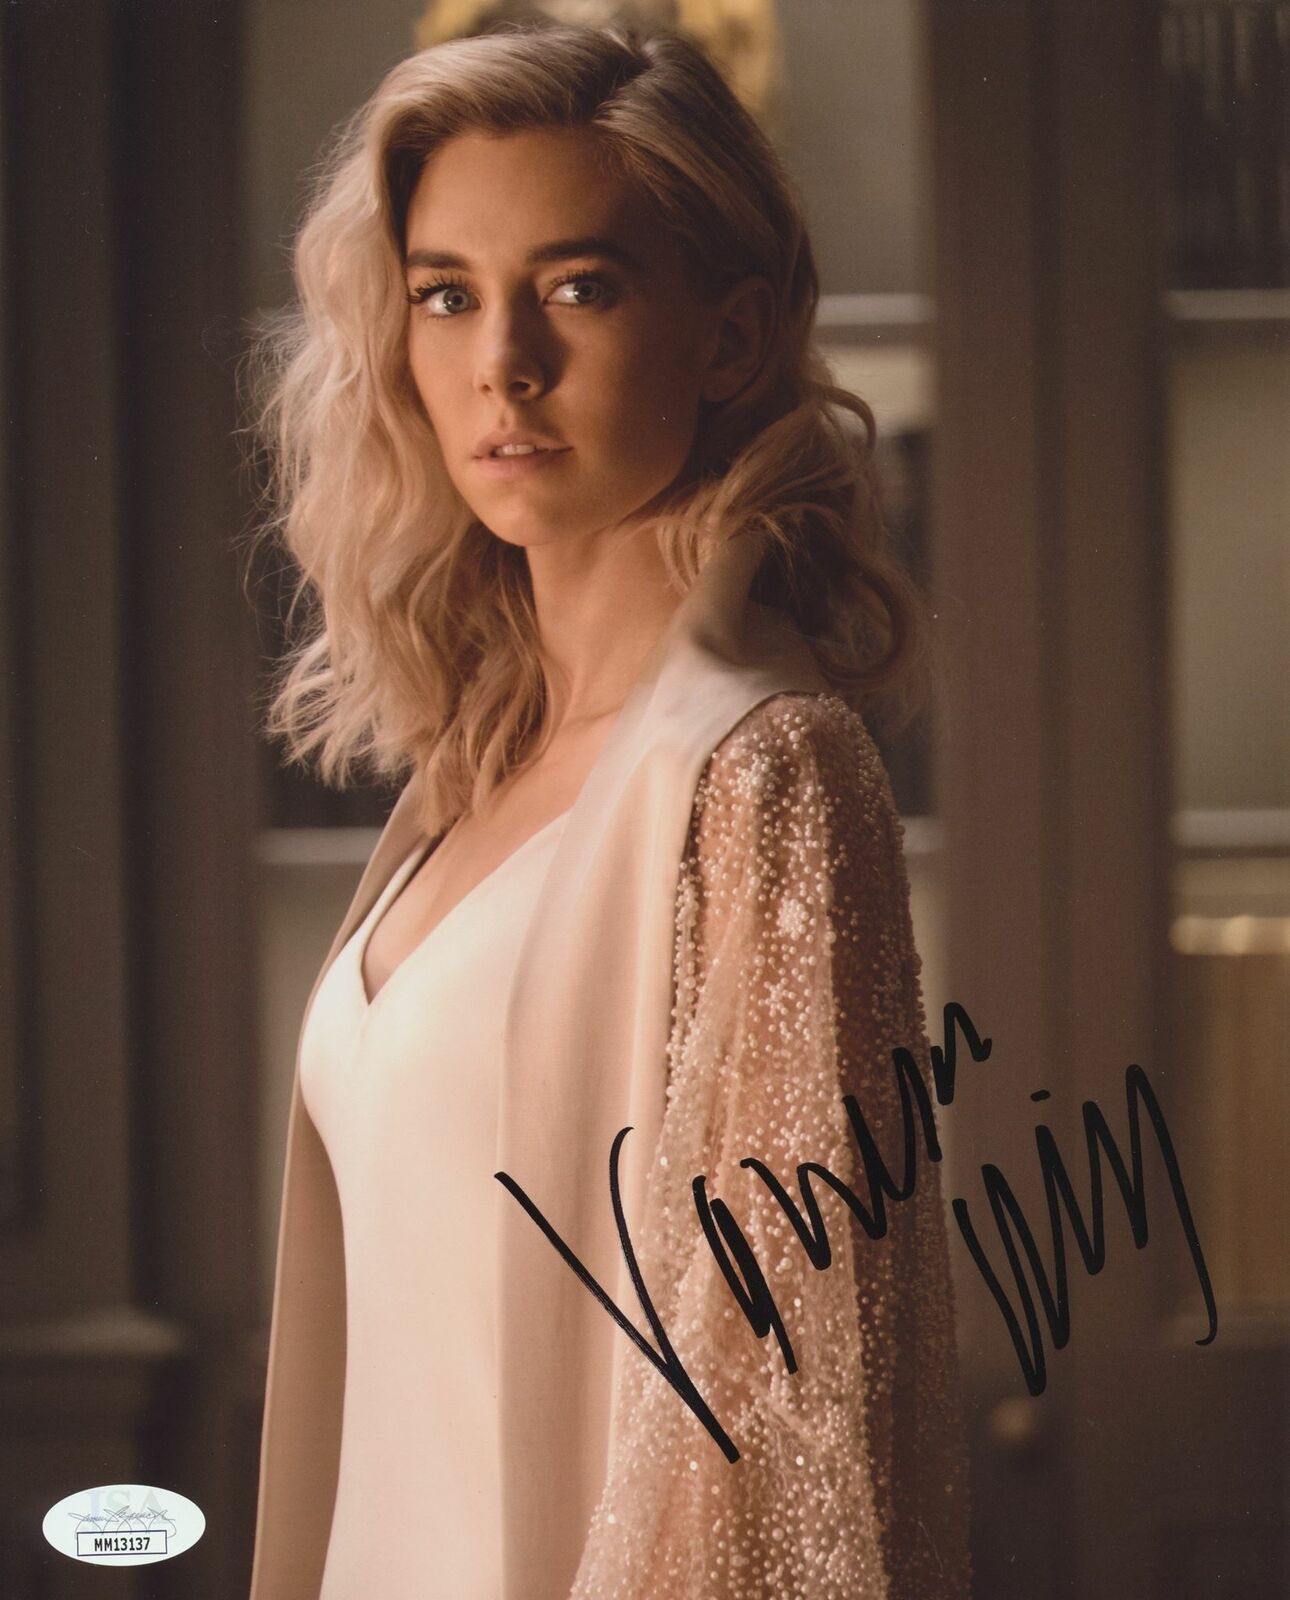 VANESSA KIRBY SIGNED MISSION IMPOSSIBLE FALLOUT 8X10 PHOTO JSA